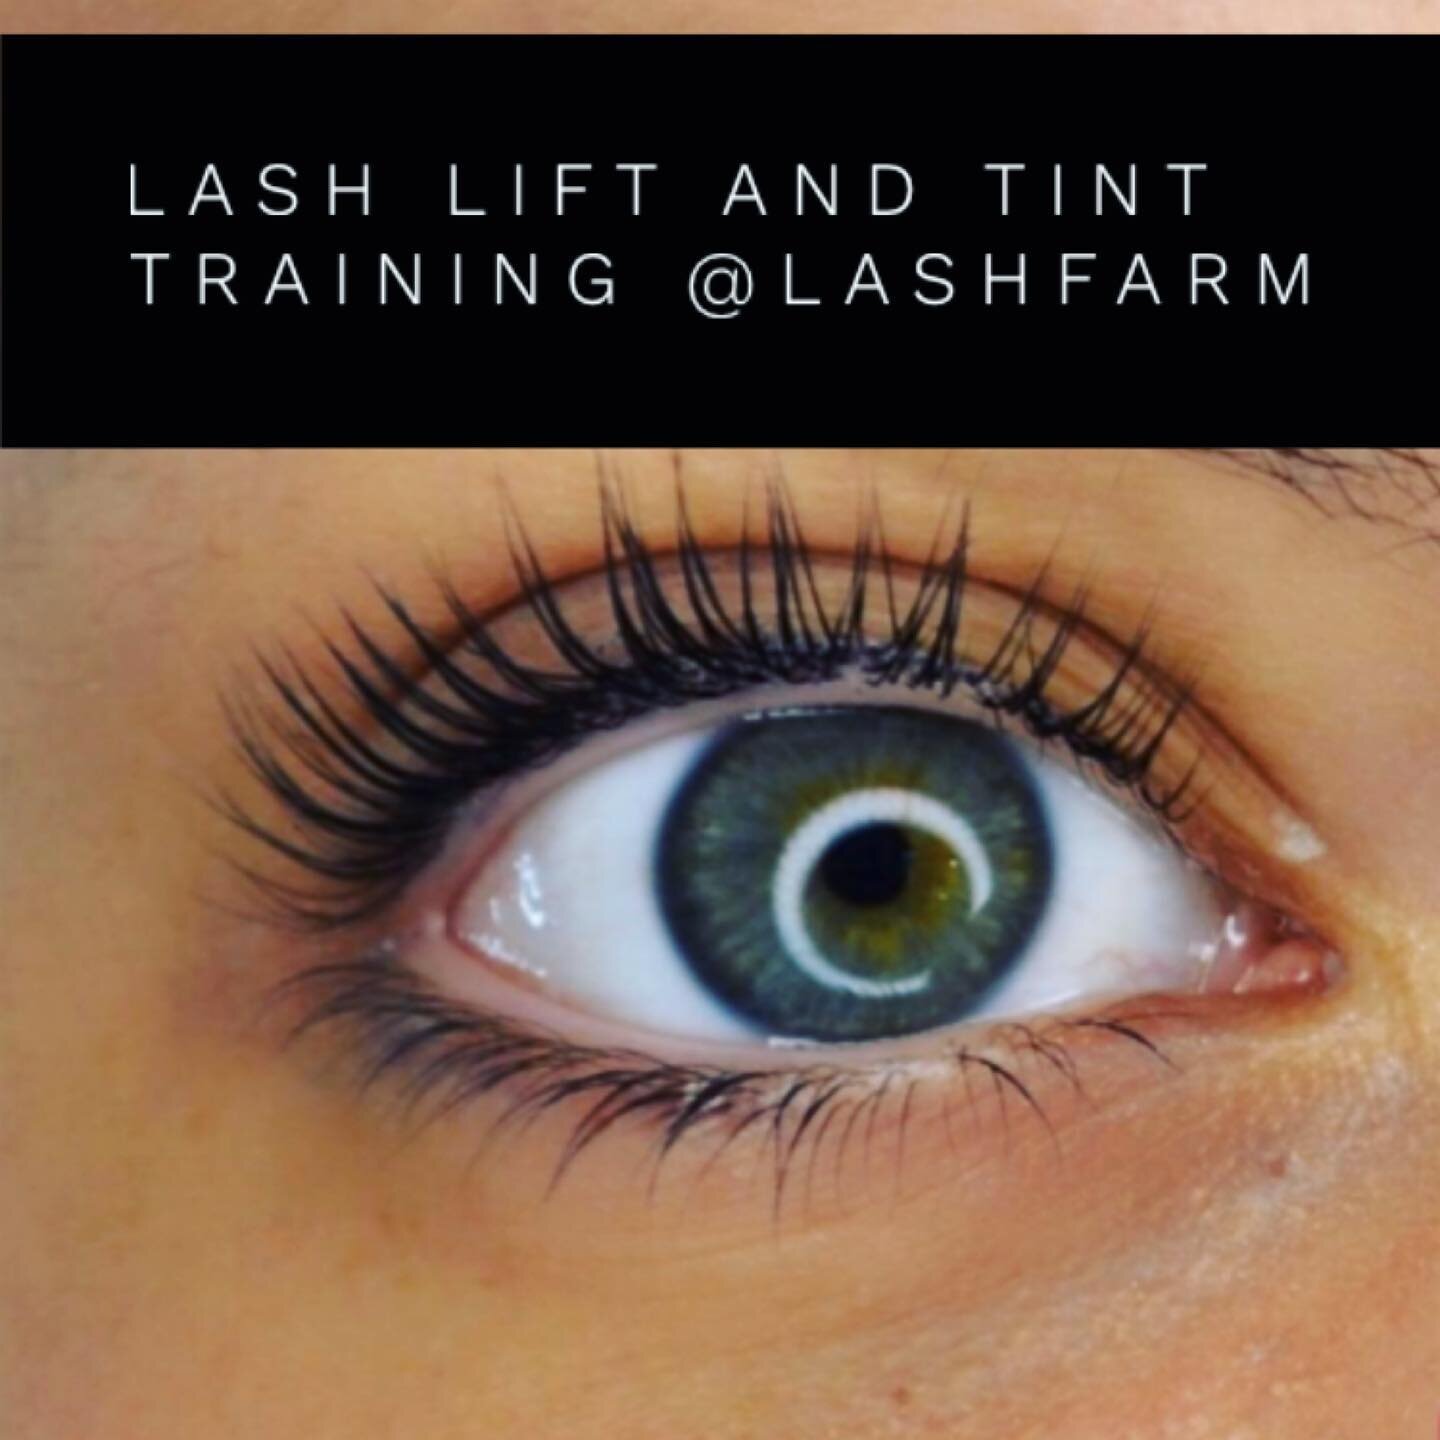 🖤 Lash lift and tint Training, Monday 28th June or Sunday 18th July 

🖤No Previous Beauty Experience needed!! ACT accredited.

🖤Work on two models for a full days training!

🖤&pound;150 (kit is extra but can be purchased) 

#training #newskills #